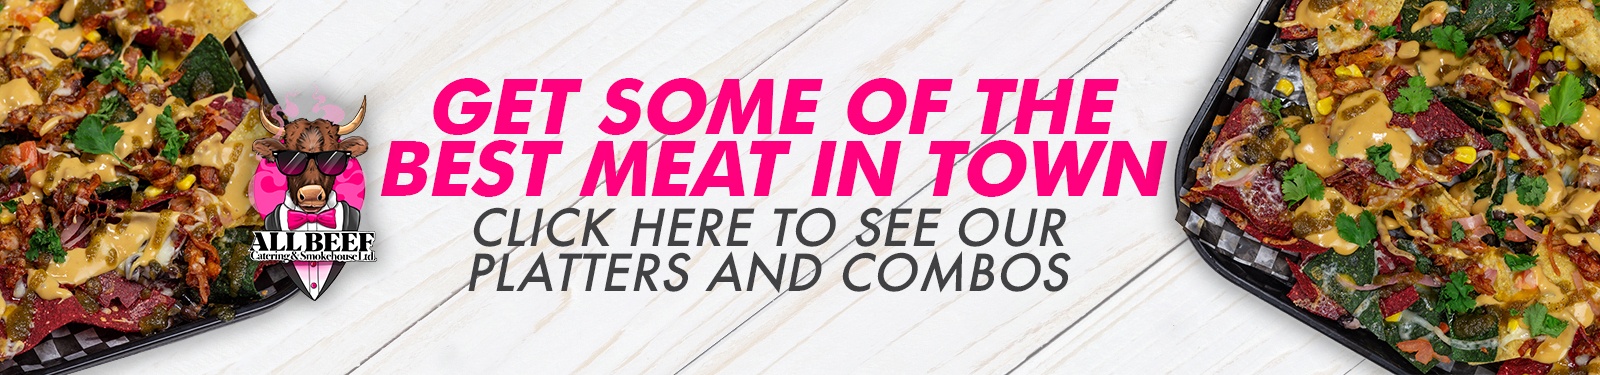 Get The Best Meat